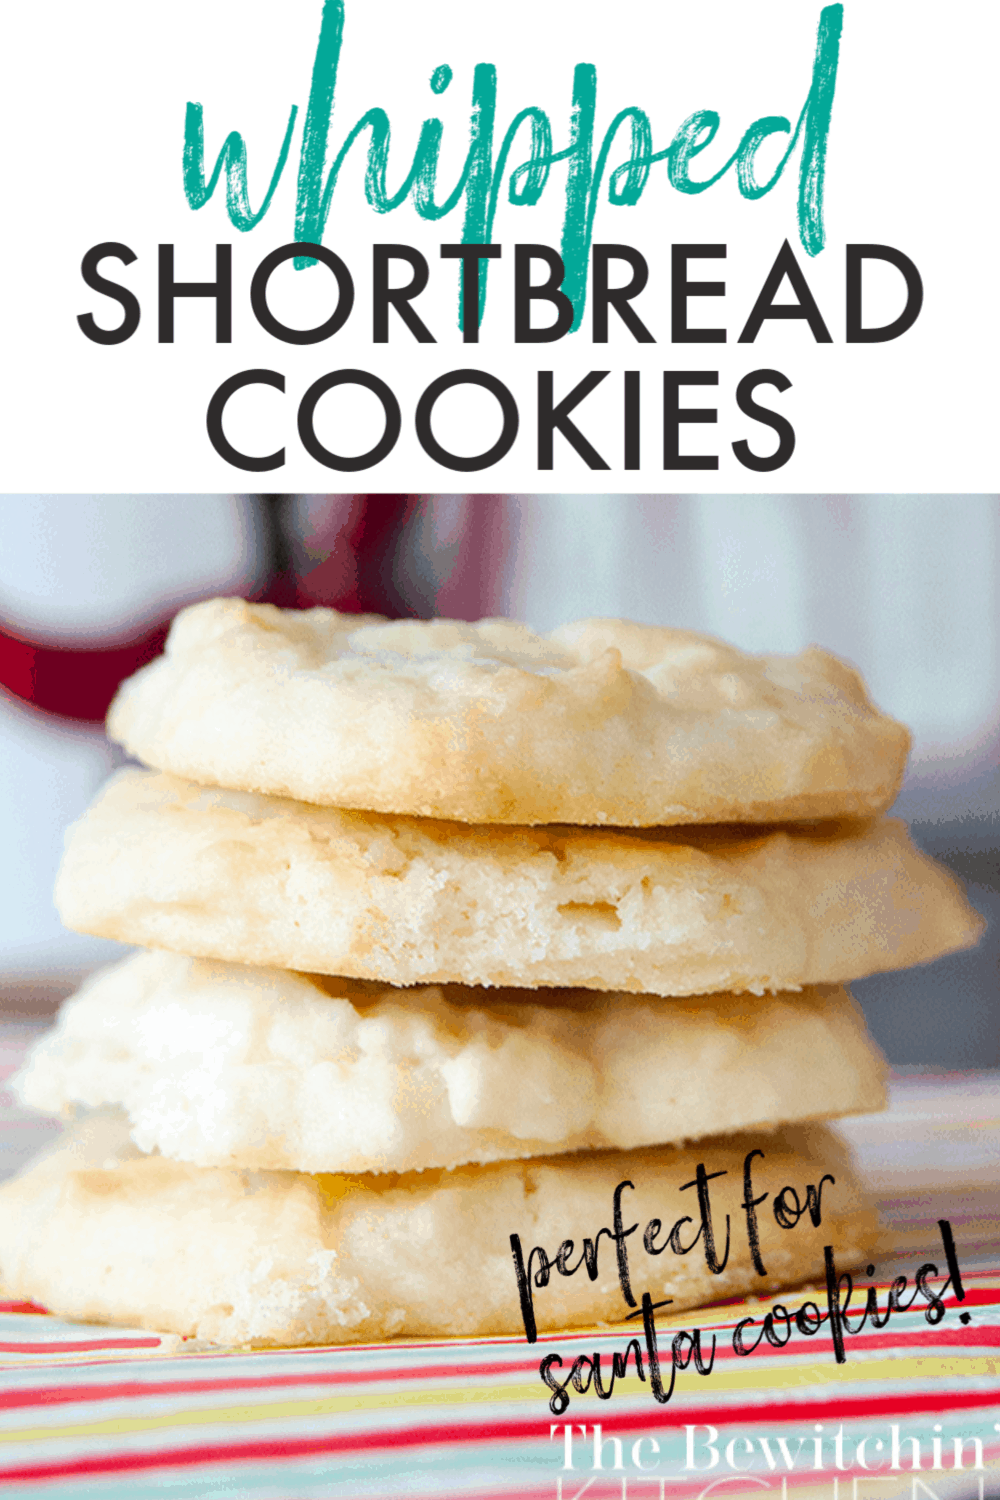 https://www.thebewitchinkitchen.com/wp-content/uploads/2019/12/whipped-shortbread.png